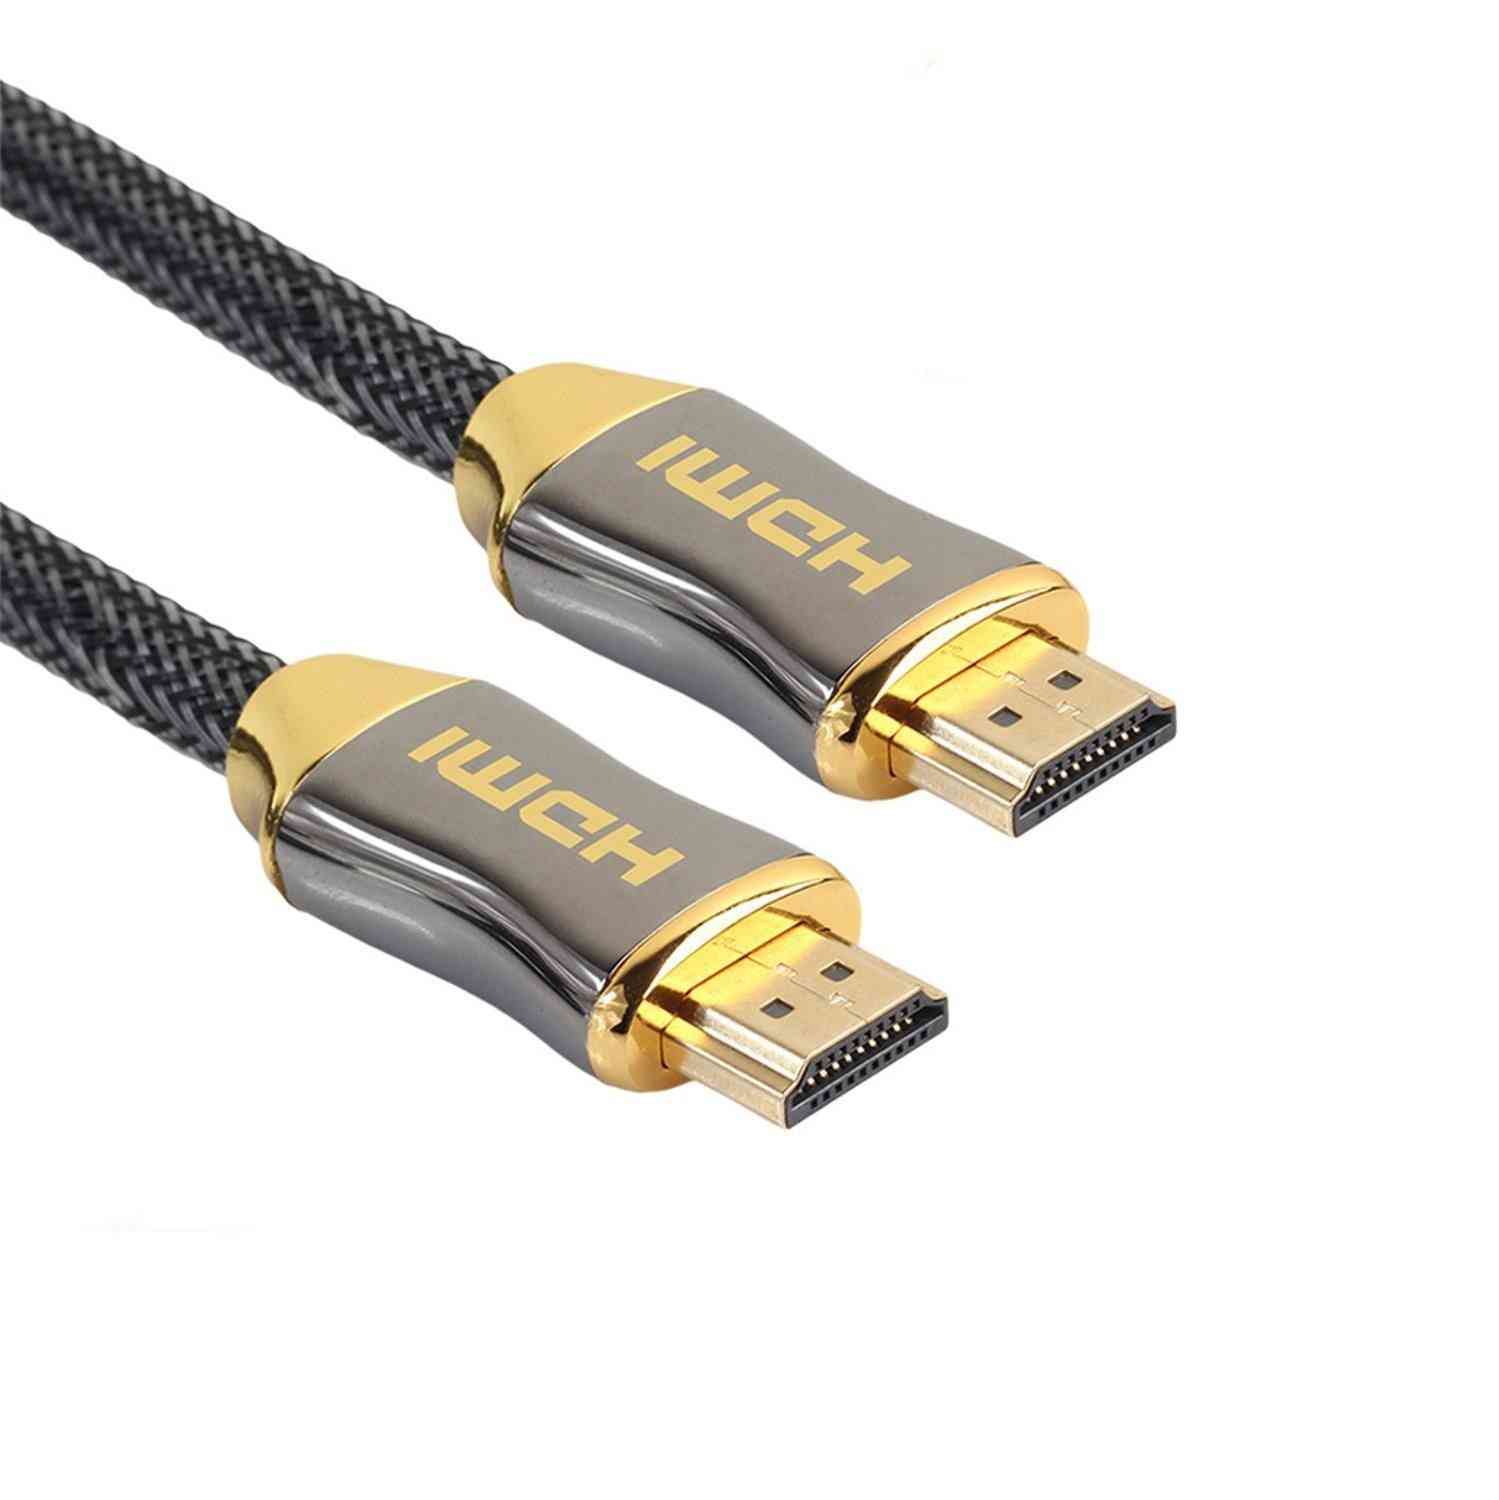 Hdmi High Speed 2.0 Plated Connection Cable Cord For Uhd, Fhd, 3d Xbox, Ps3, Ps4 And Tv